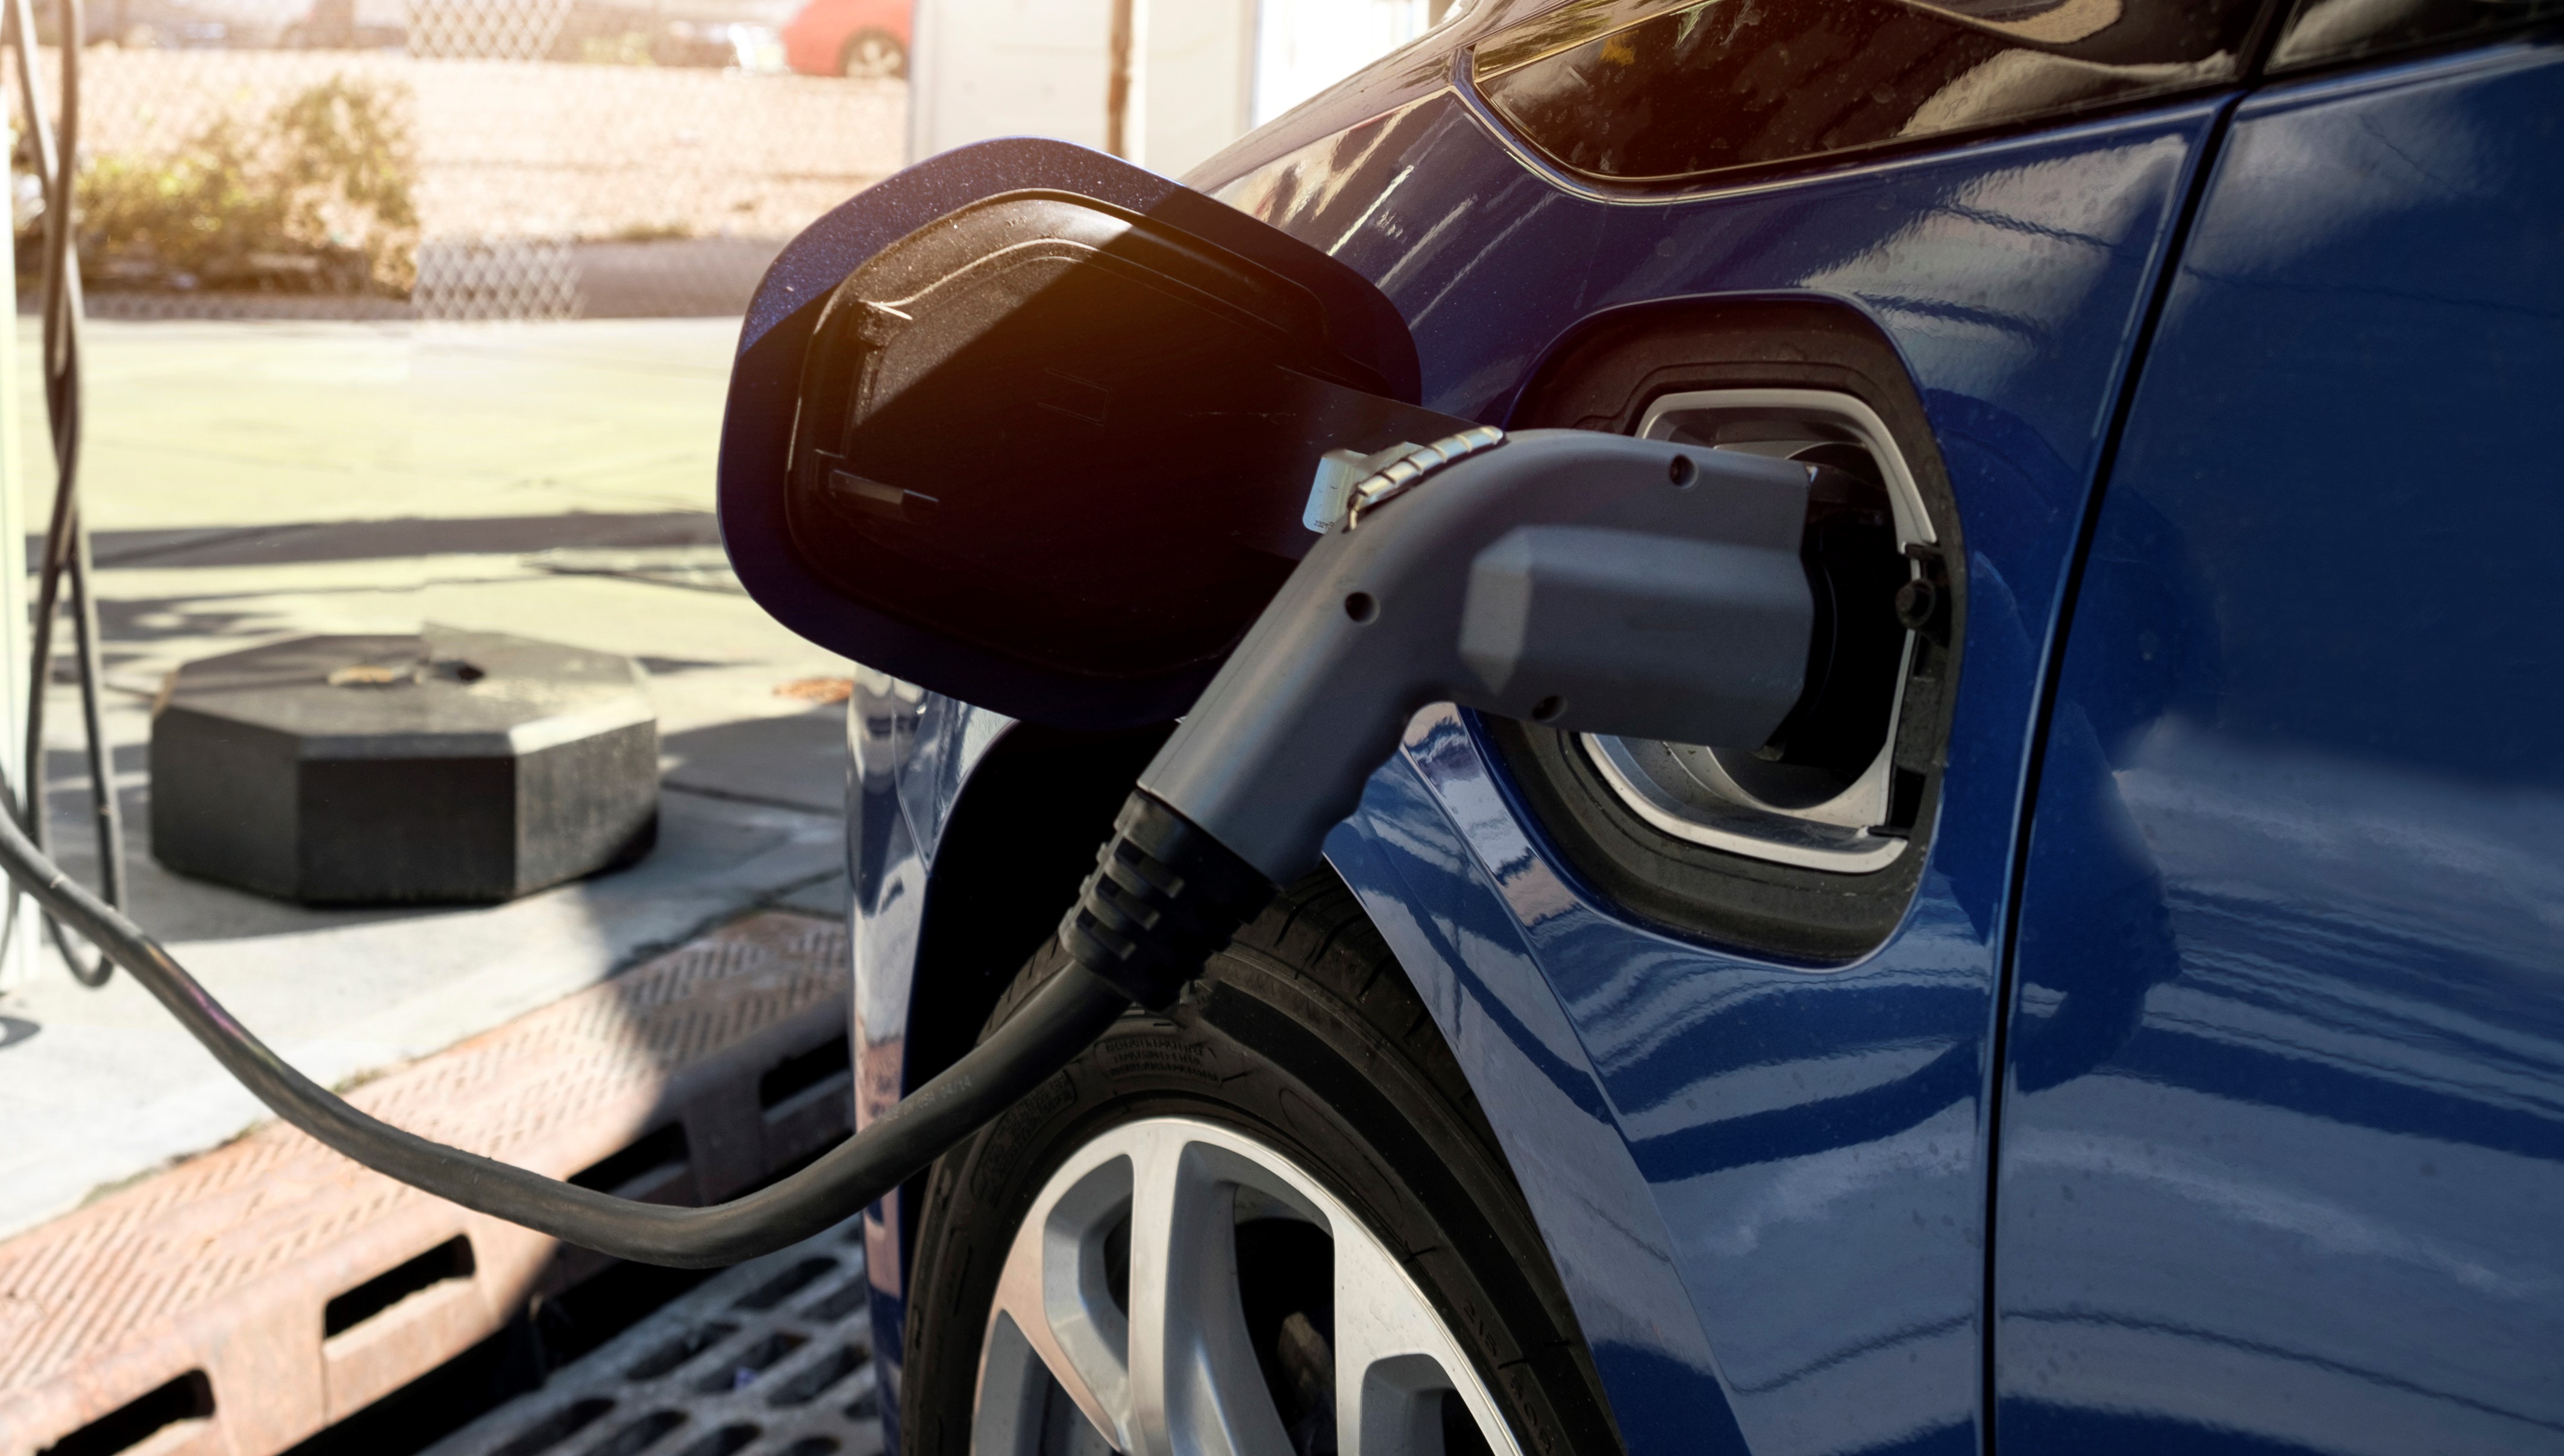 ELECTRIC VEHICLE STATIONS PROVIDE FOR ZERO EMMISSIONS